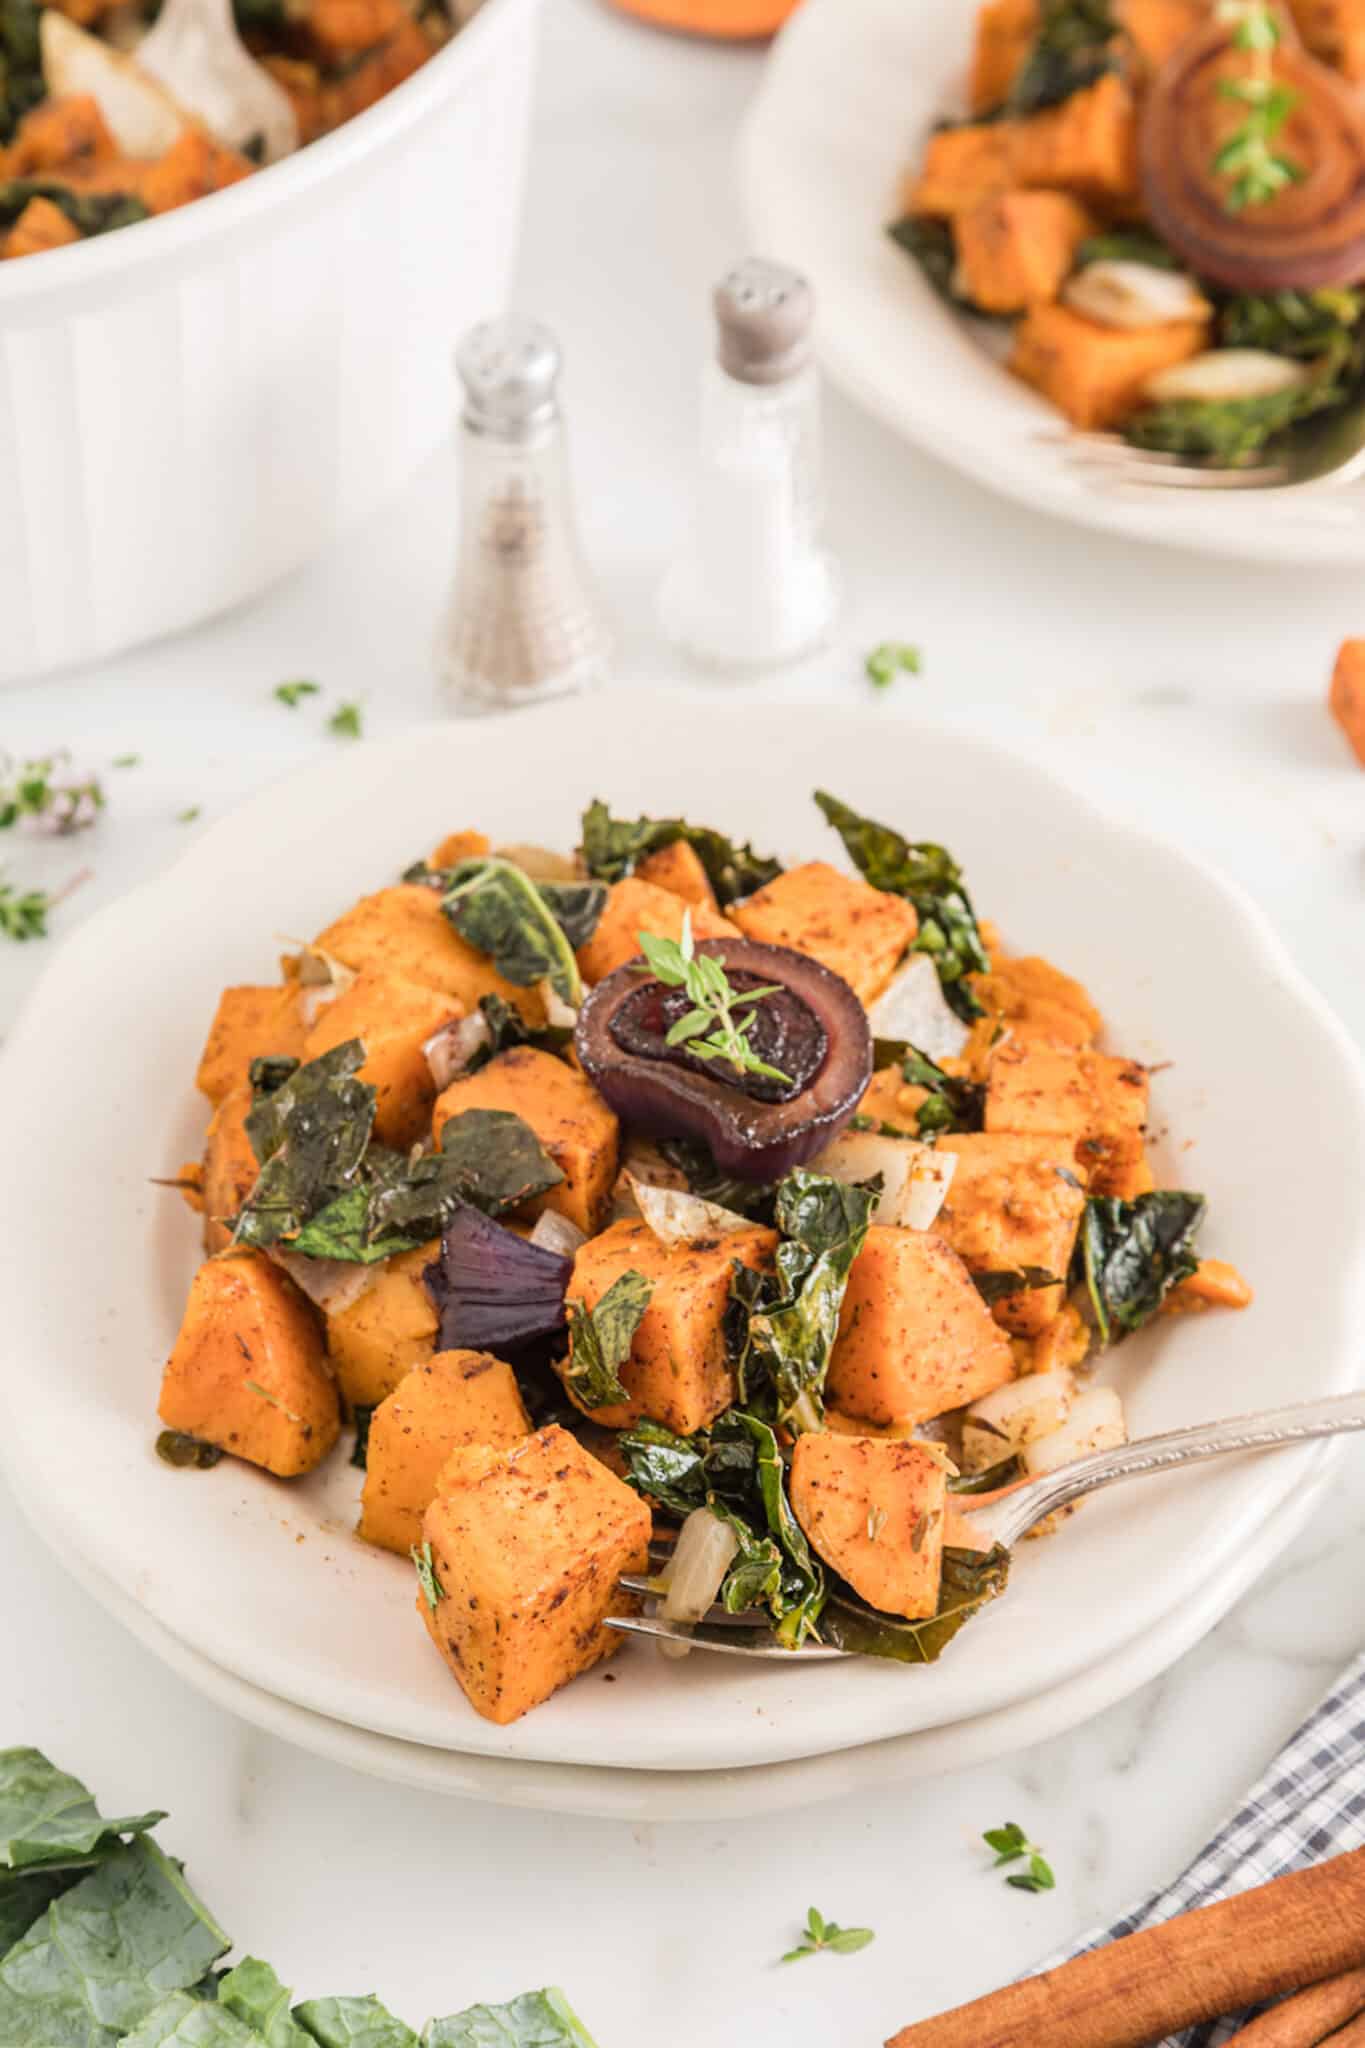 plate of baked sweet potato, kale and onion with fork.